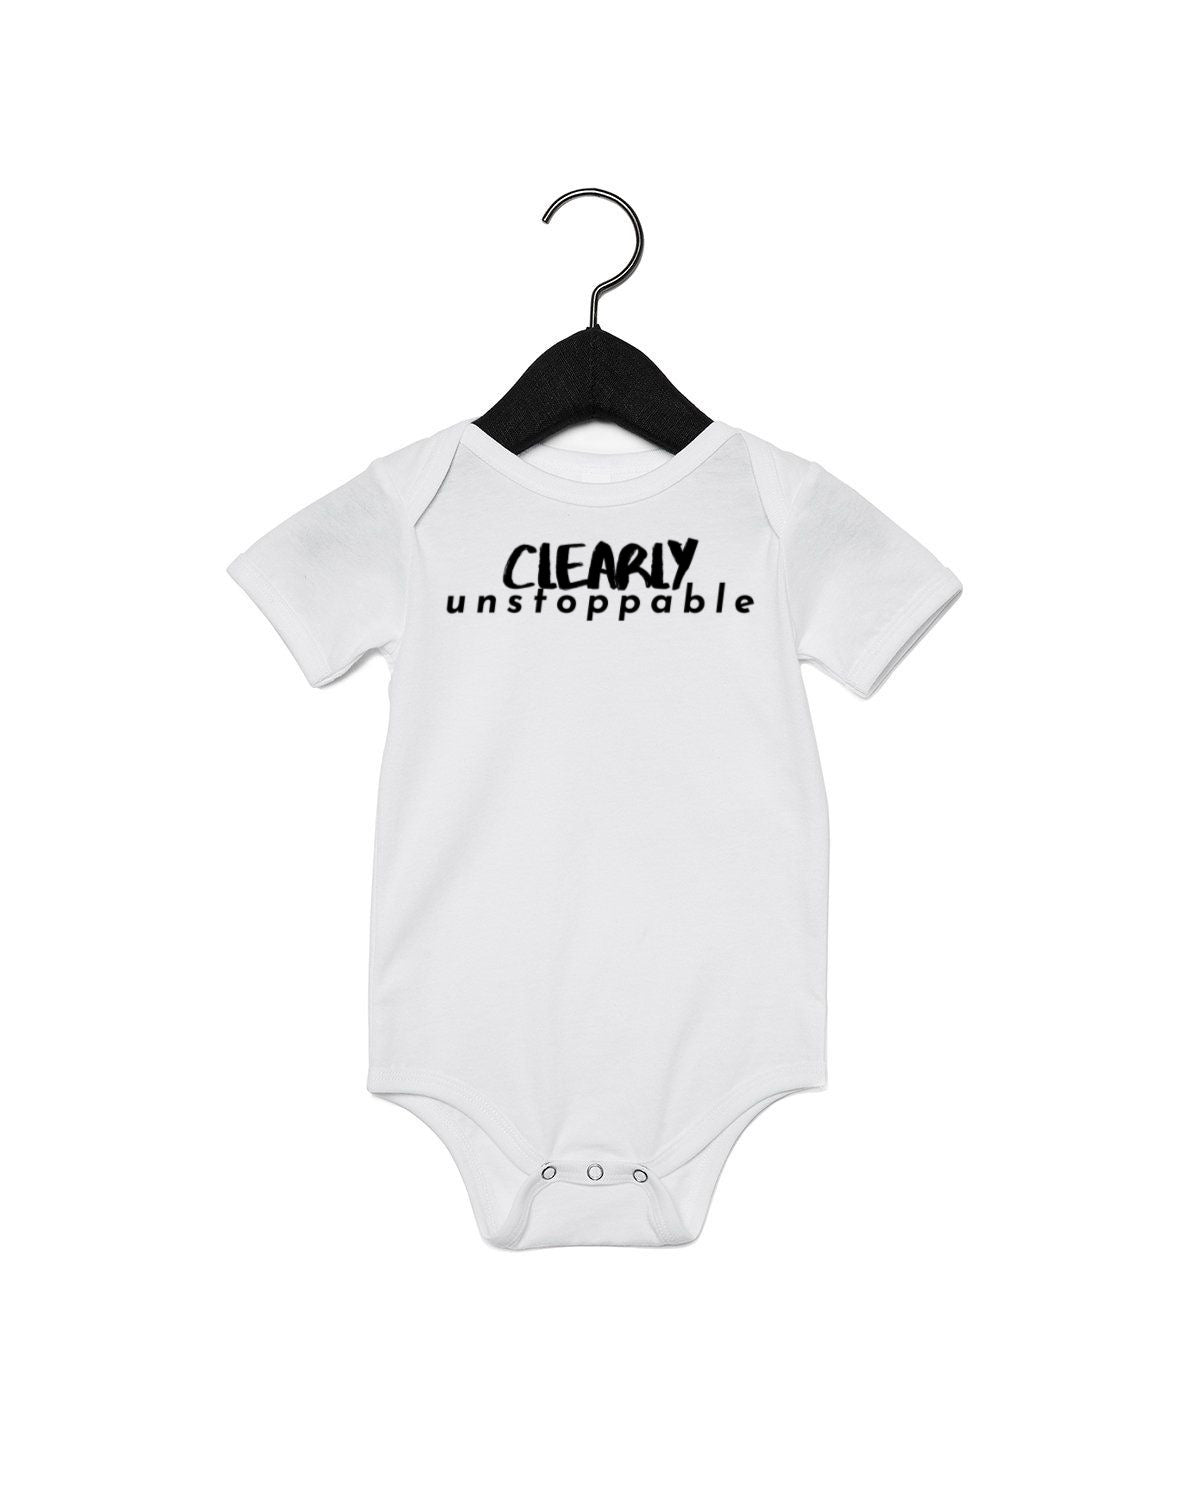 CLEARLY unstoppable Tee